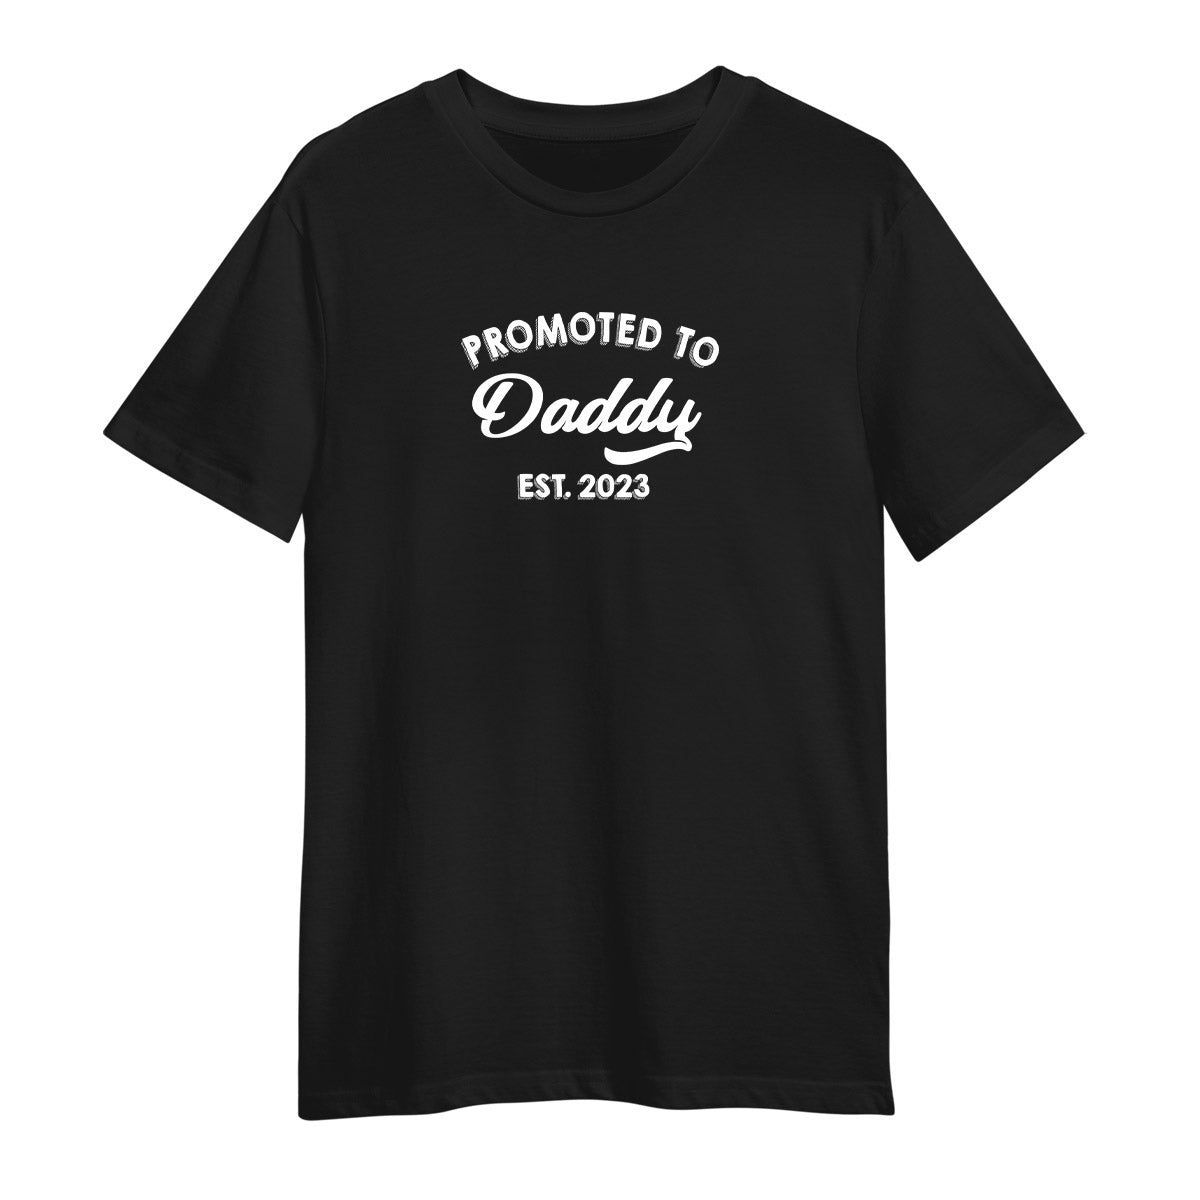 Promoted to Daddy 2023 Black T-Shirt 